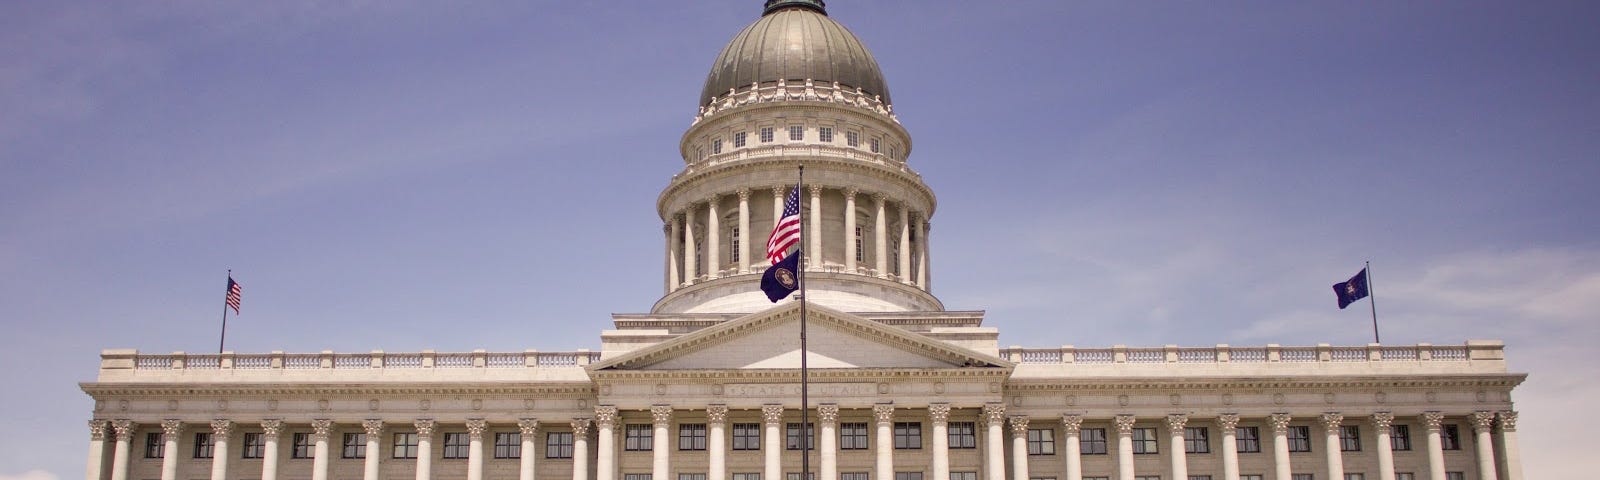 State capitol building with flags flying in front